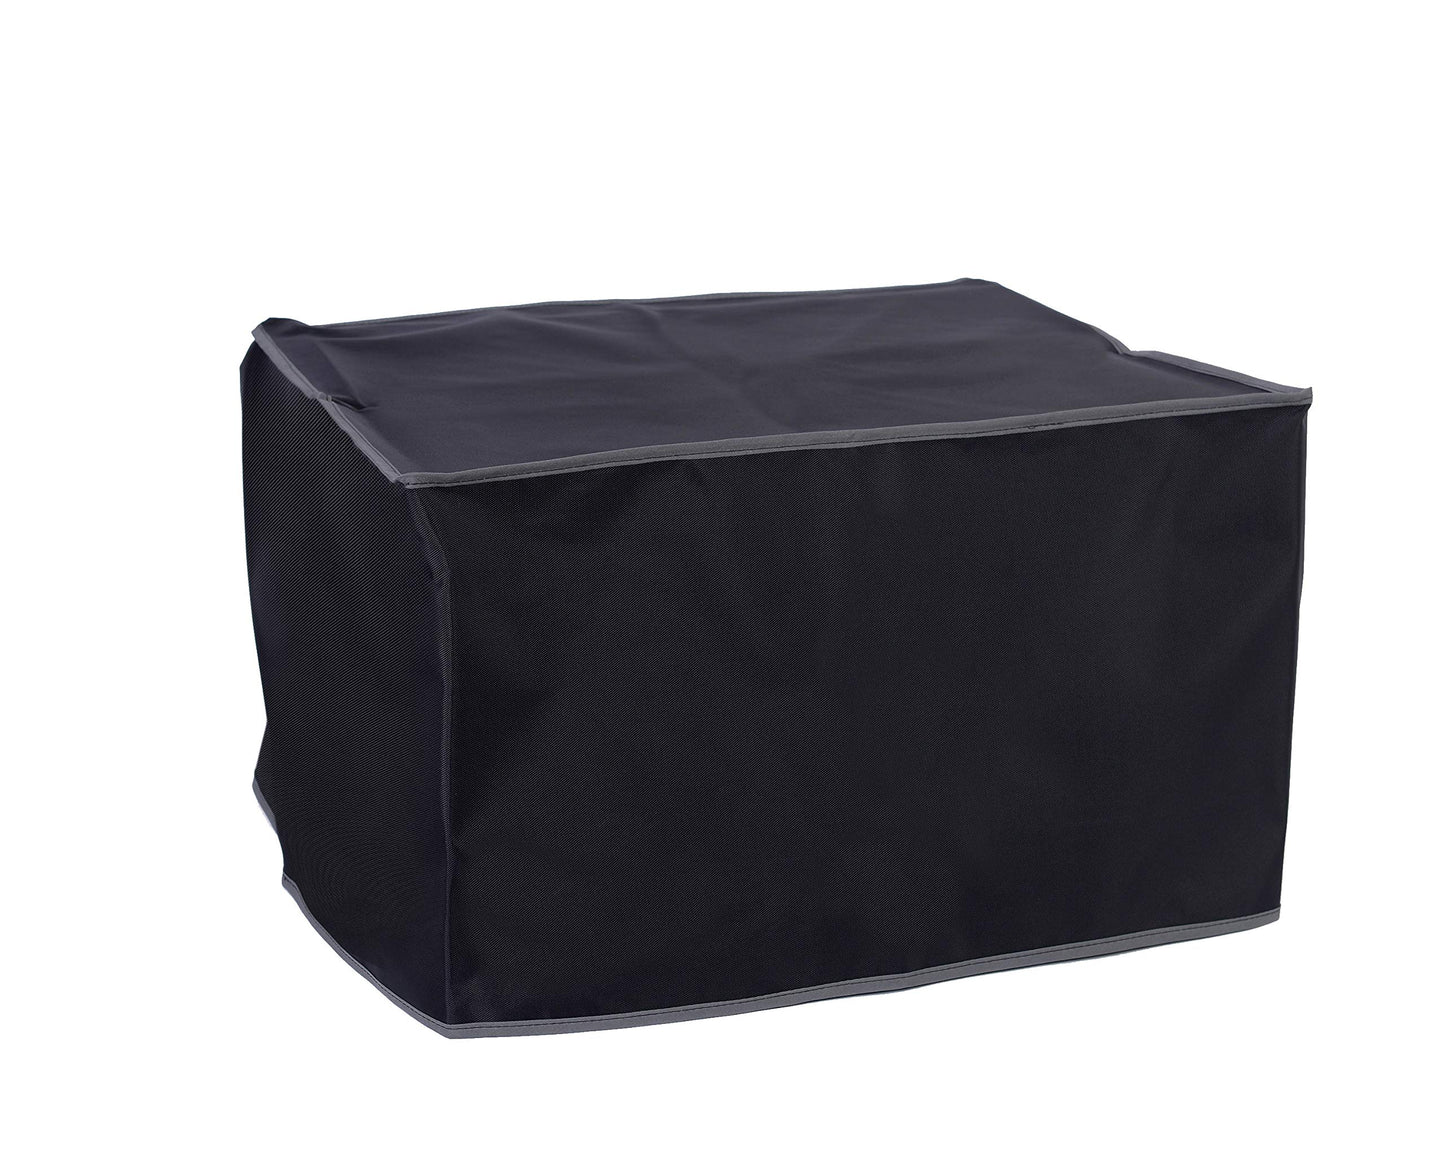 The Perfect Dust Cover, Strong Cover for HP Envy Photo 7820 Wireless Printer, Black Nylon Anti Static Cover Dimensions 17.8''W x 16.2''D x 7.5''H by The Perfect Dust Cover LLC